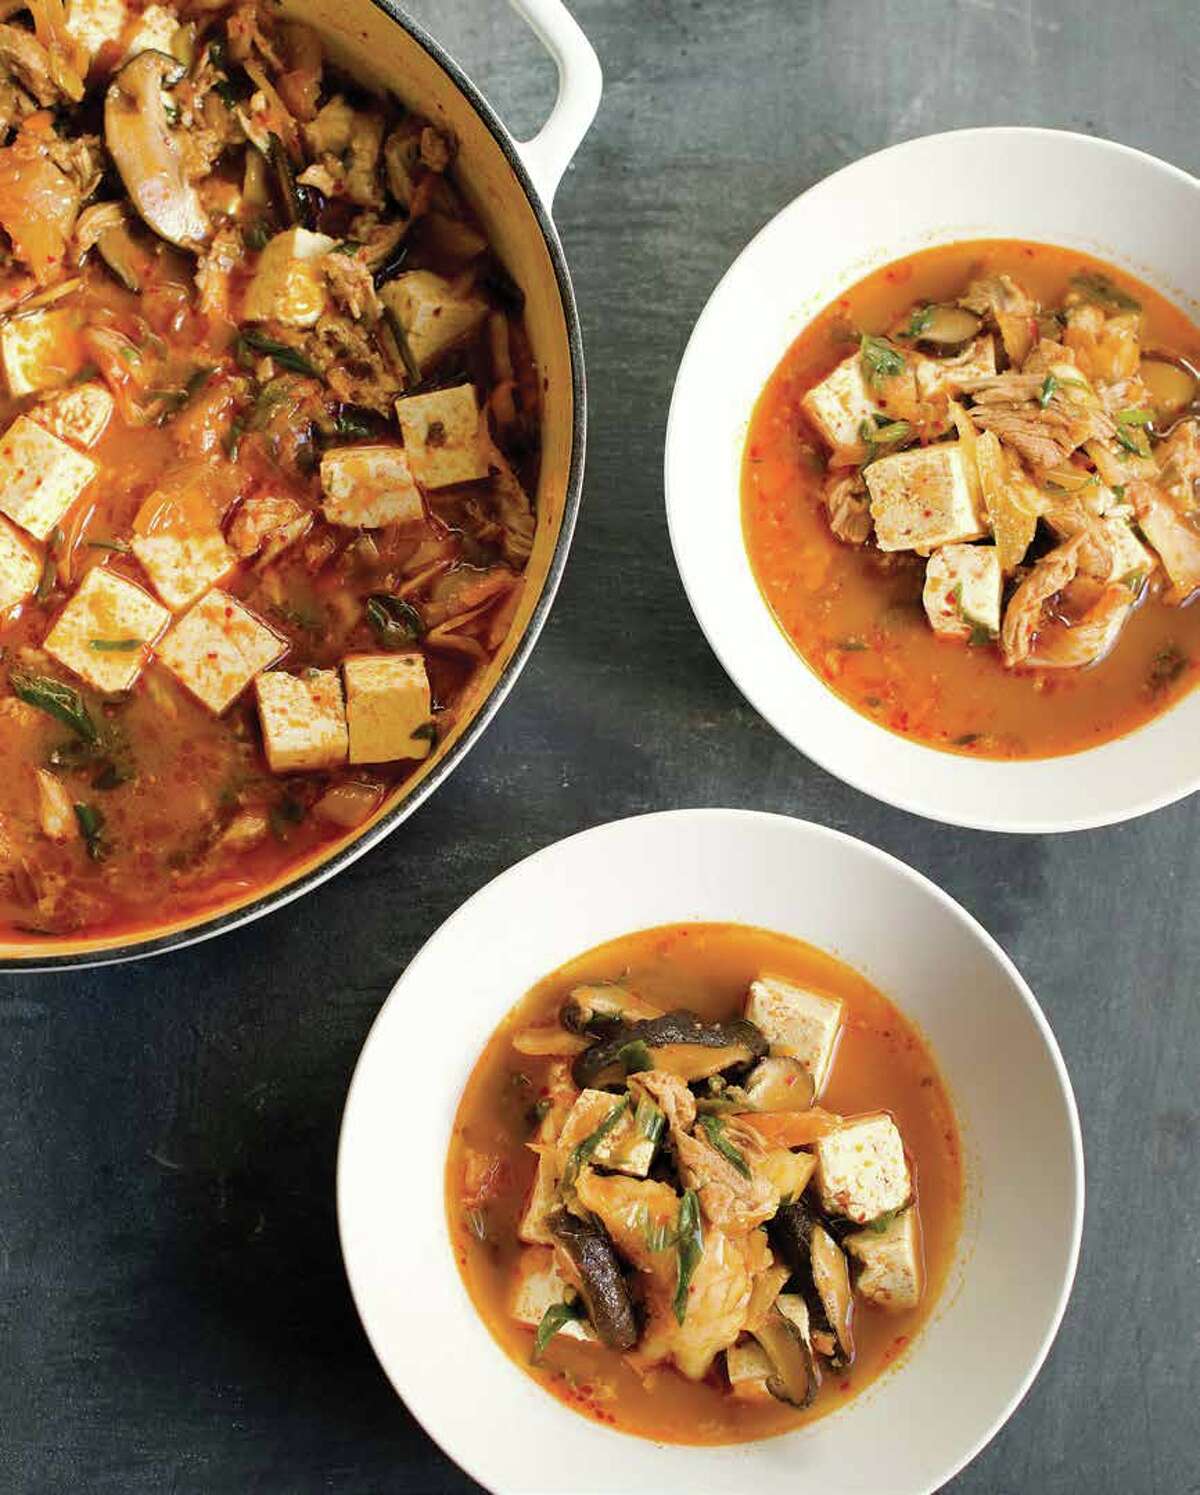 Korean Pork and Kimchi Stew is featured in "Christopher Kimball's Milk Street: The New Home Cooking," the first cookbook from Milk Street. 